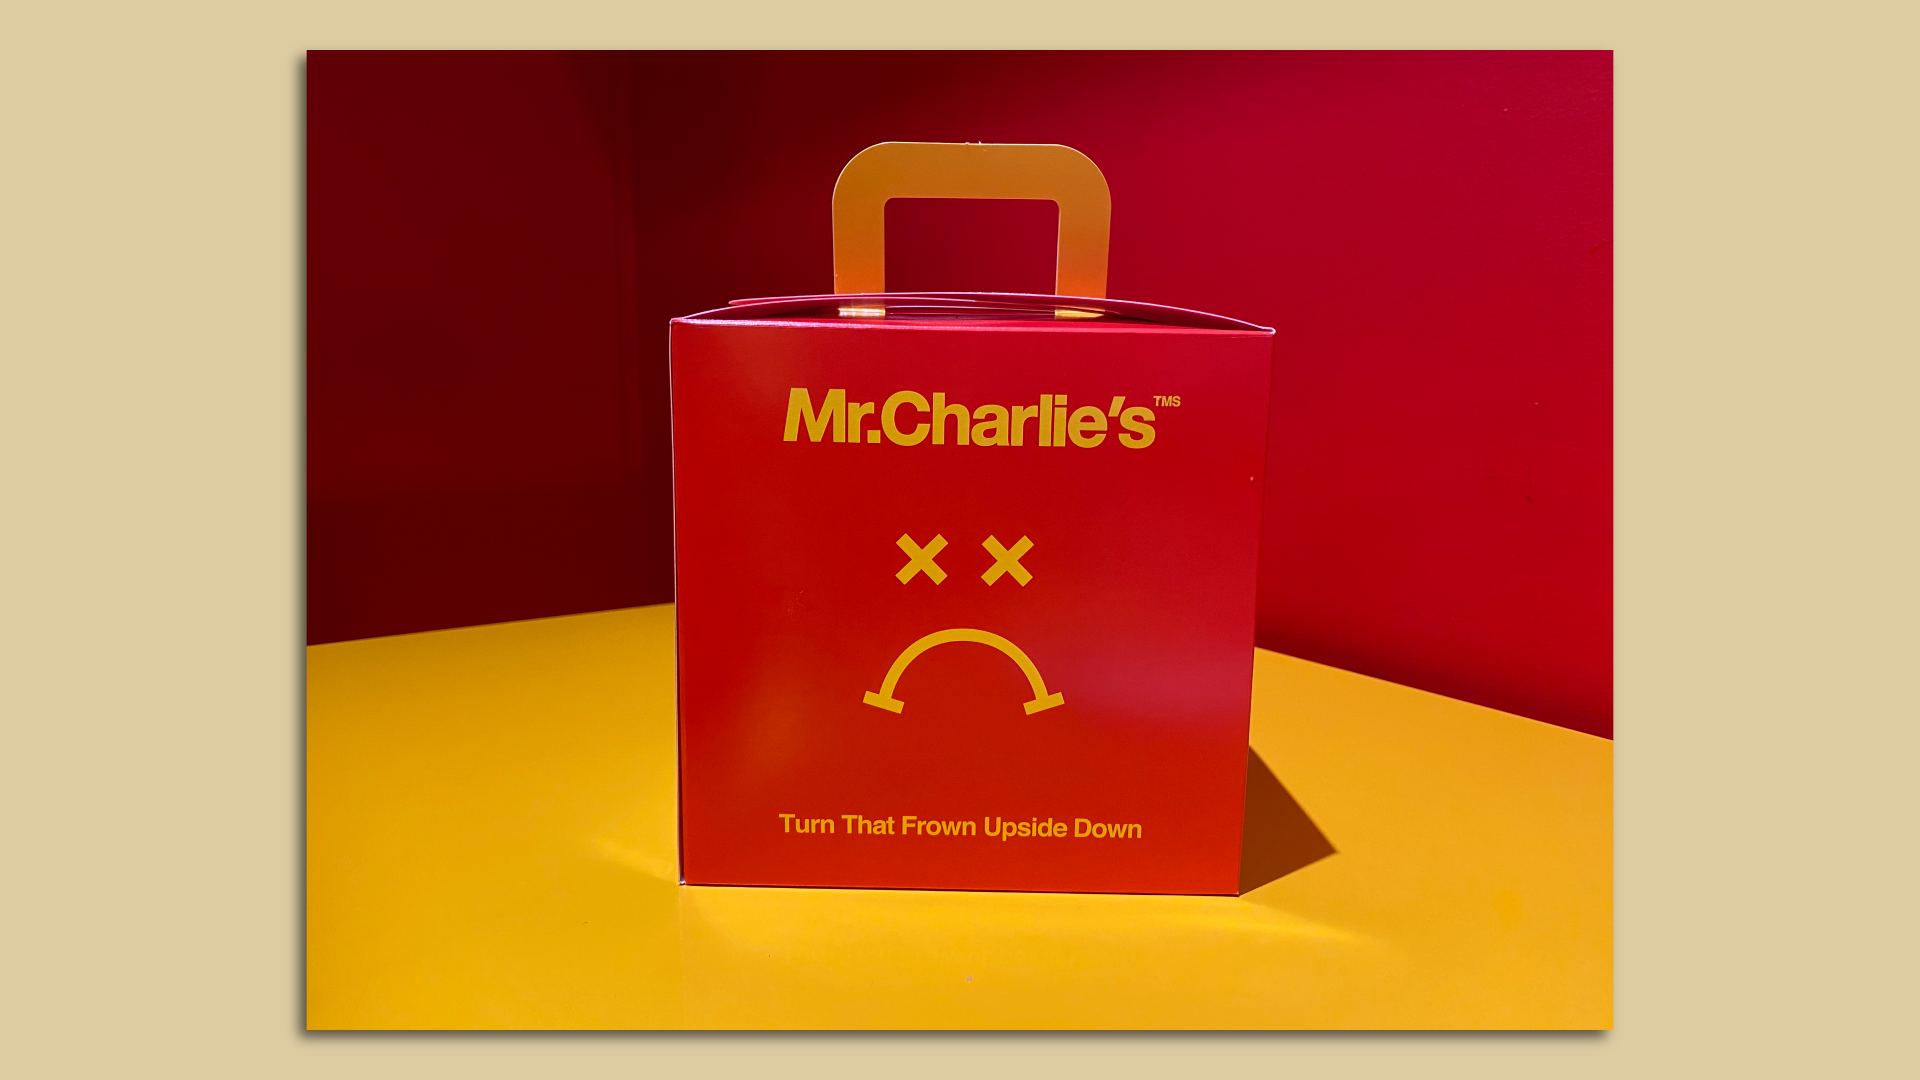 Photo of a red to-go fast food box that says "Mr. Charlie's" in yellow at top with a yellow frowny face below and the words "Turn that Frown Upside Down" sitting on a yellow table.